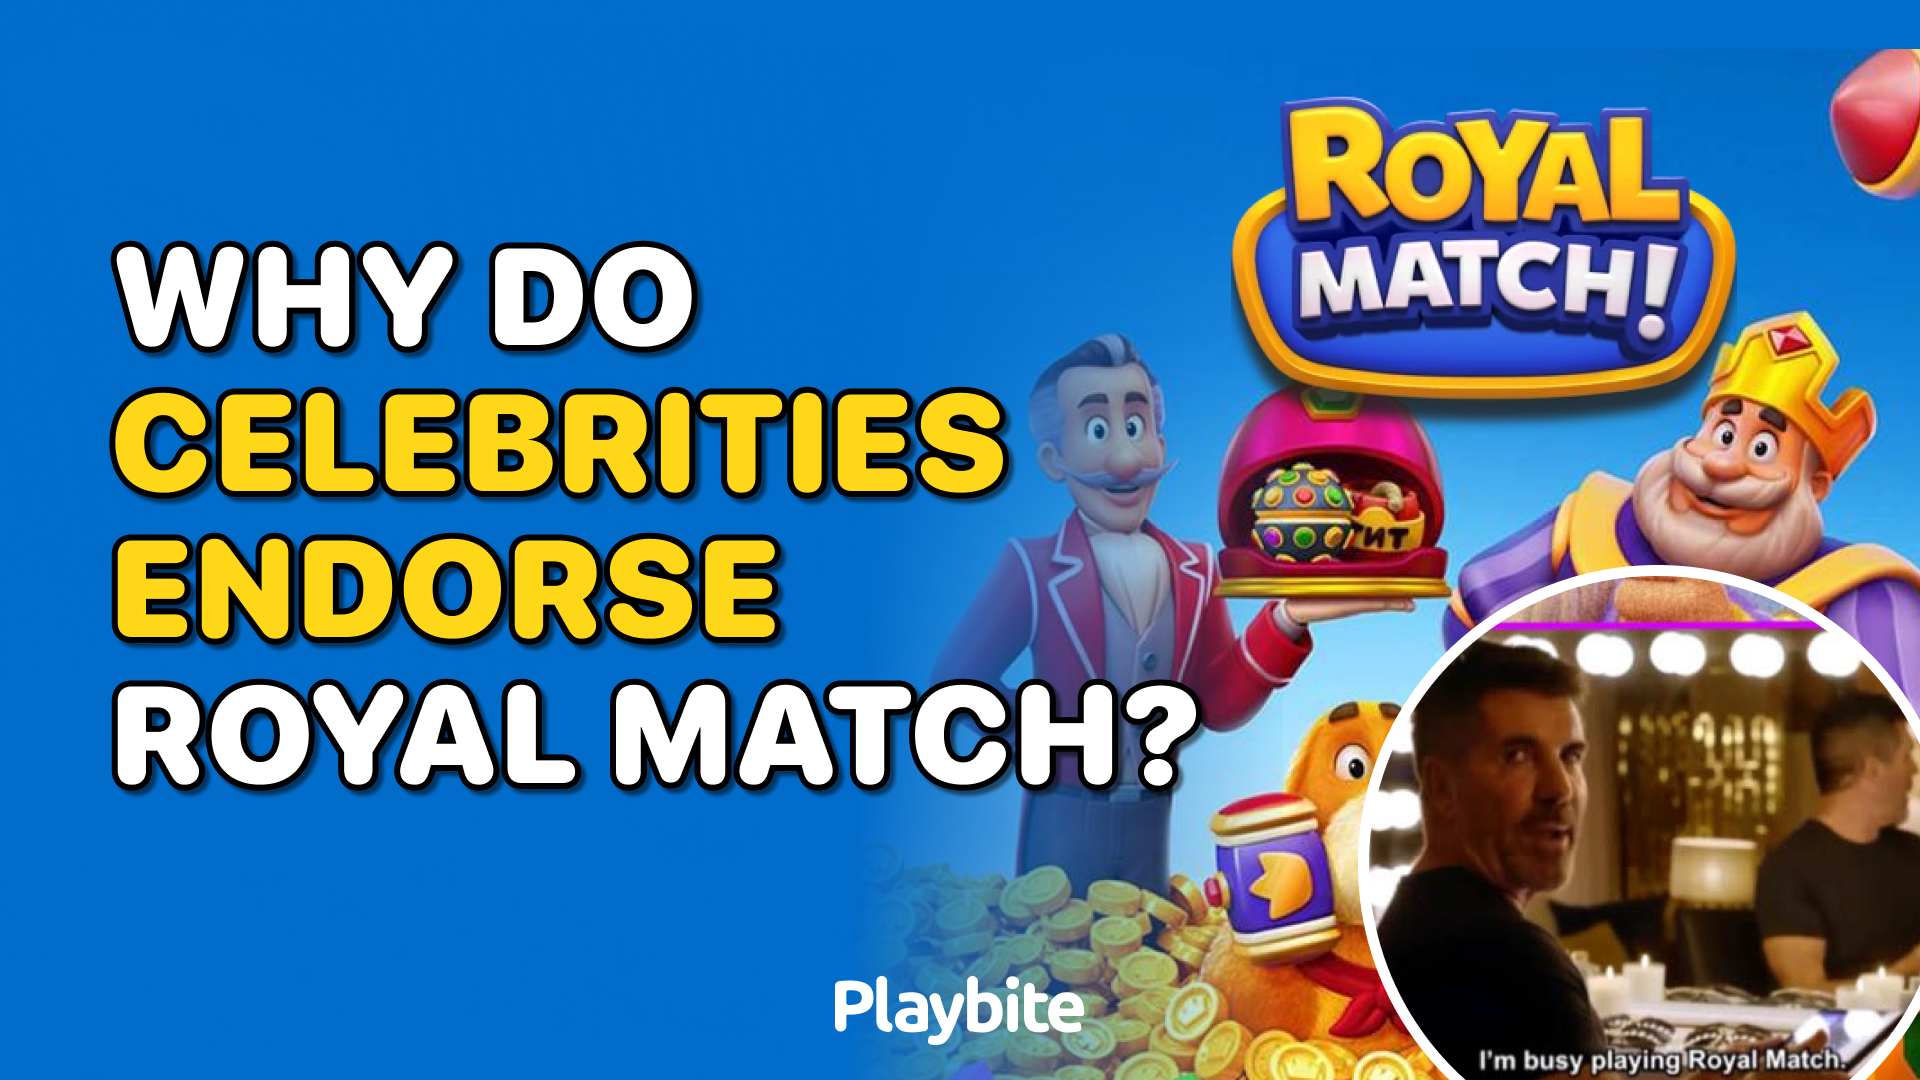 Why Do Celebrities Endorse Royal Match?